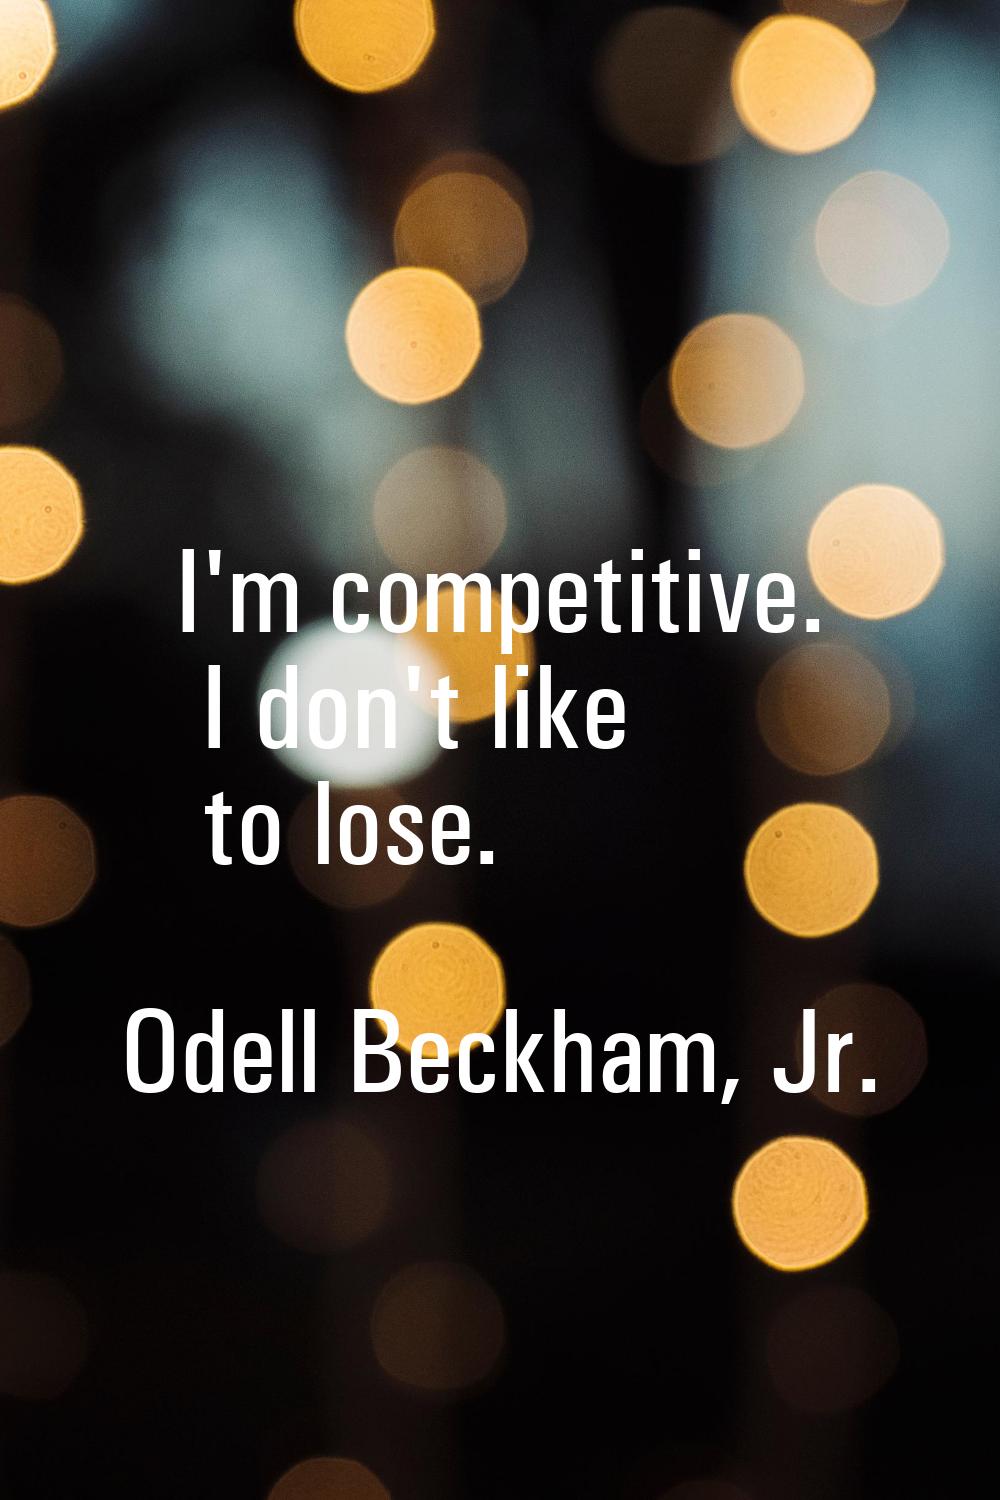 I'm competitive. I don't like to lose.